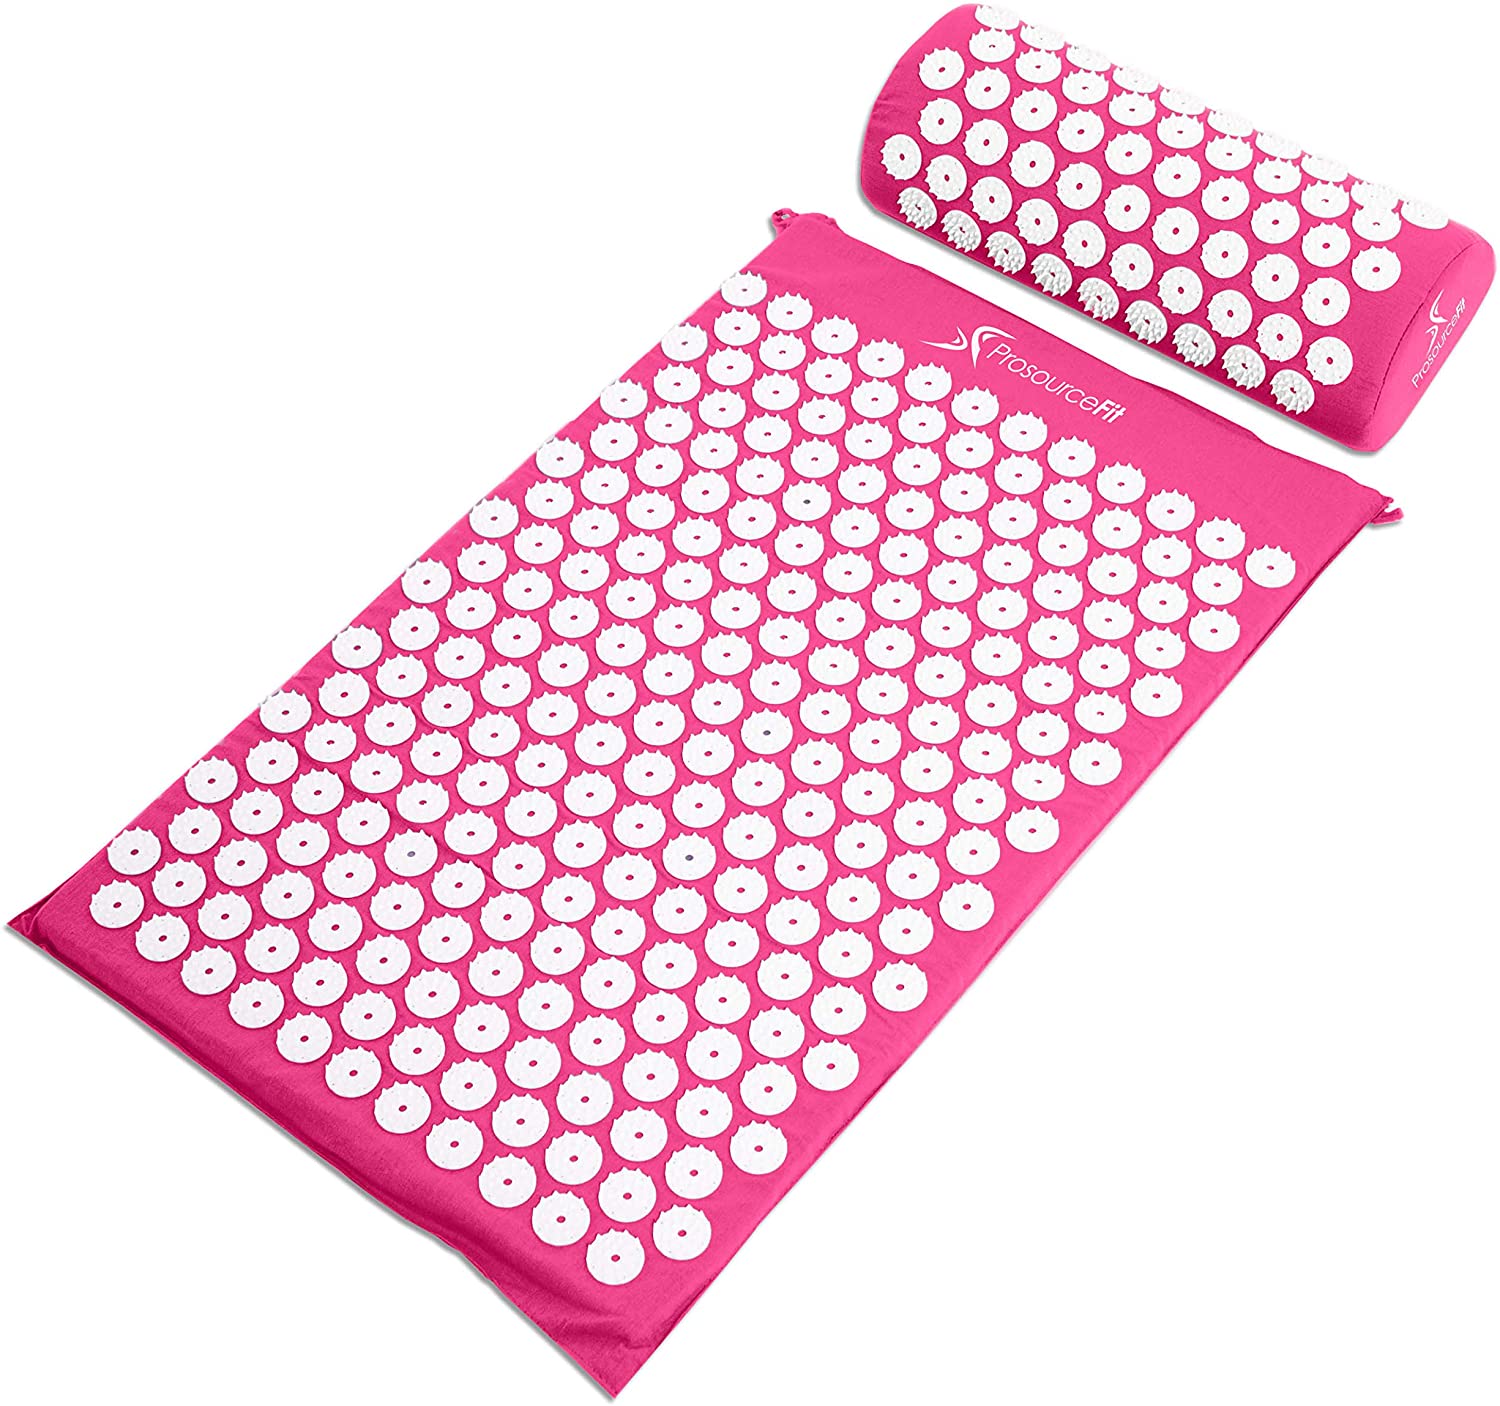 Acupressure Mat and Pillow Set - 100+ Gifts for Female Entrepreneurs